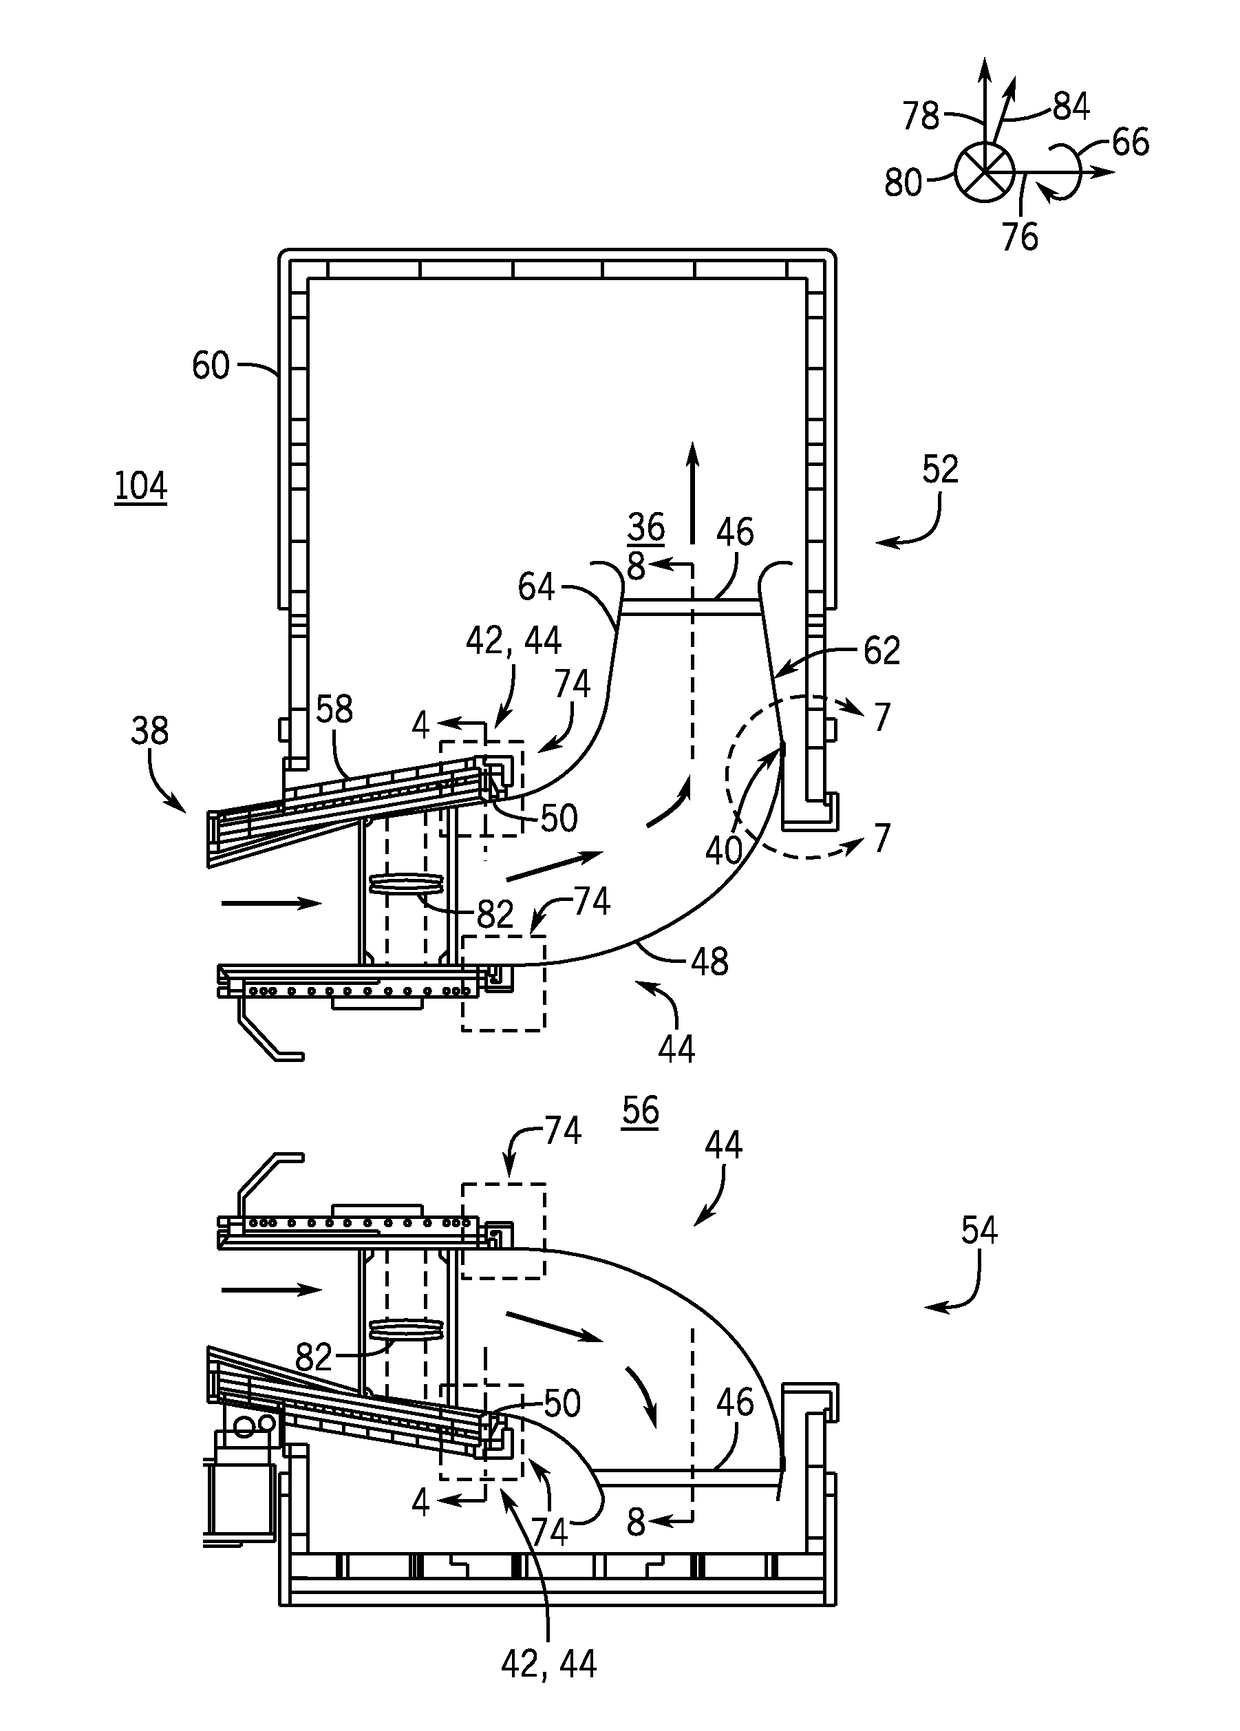 System of supporting turbine diffuser